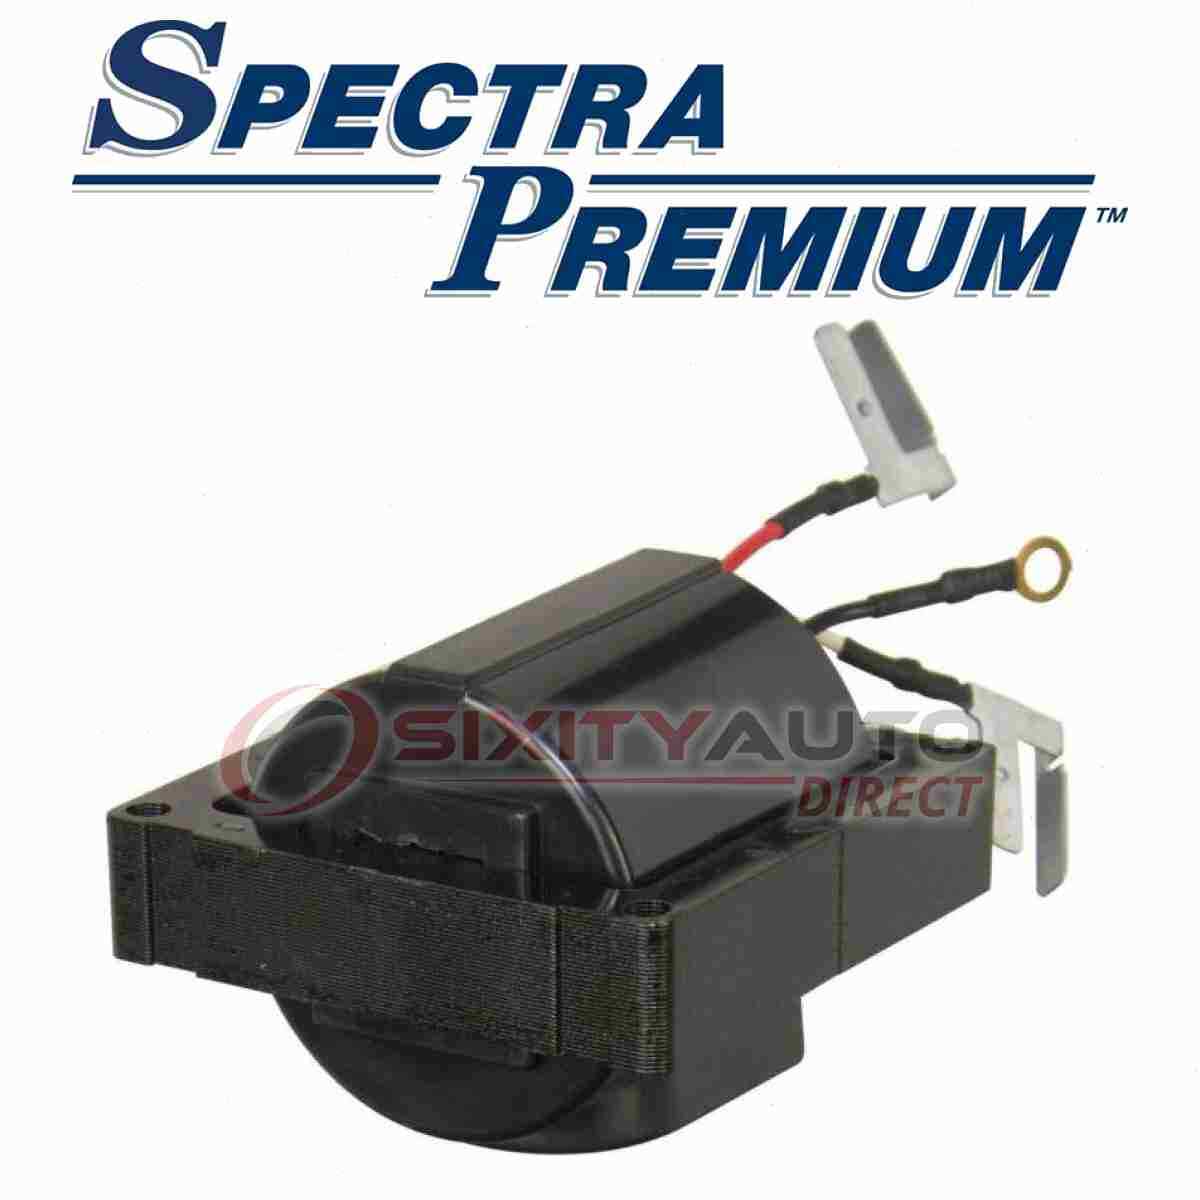 Spectra Premium Ignition Coil for 1978-1984 Oldsmobile Cutlass Calais 3.8L ic